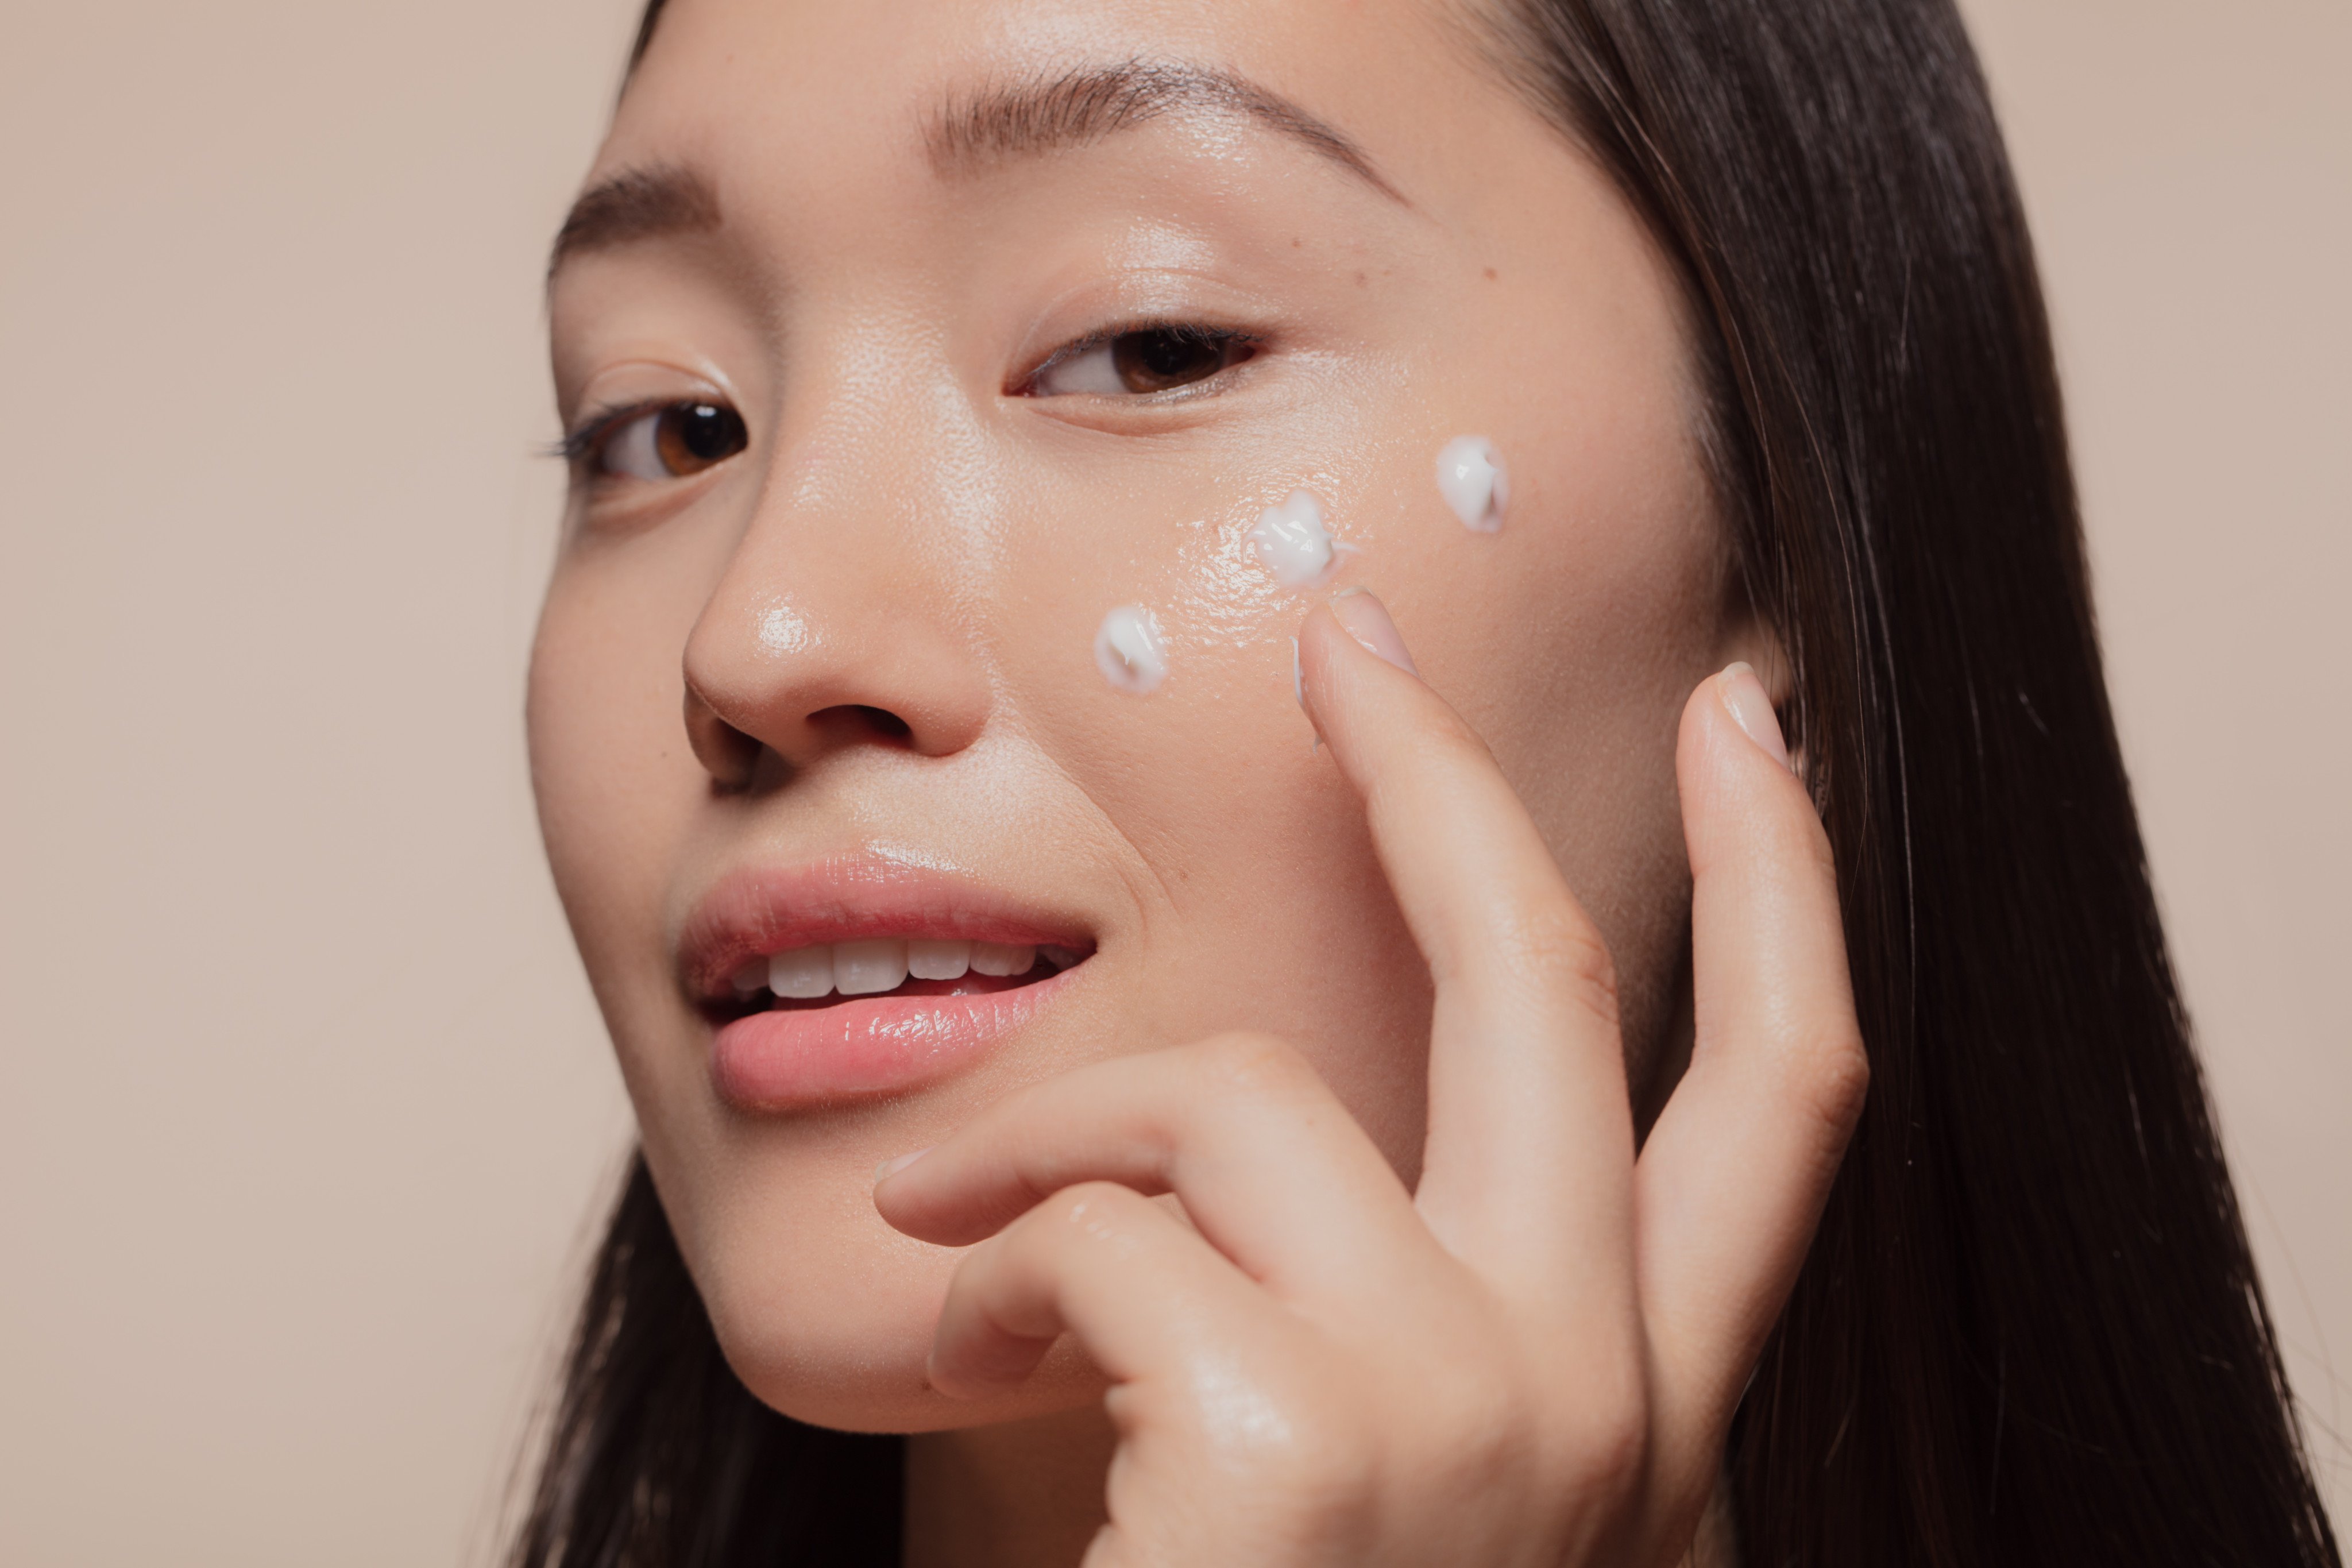 Sometimes, less is more when it comes to skincare. Photo: Shutterstock